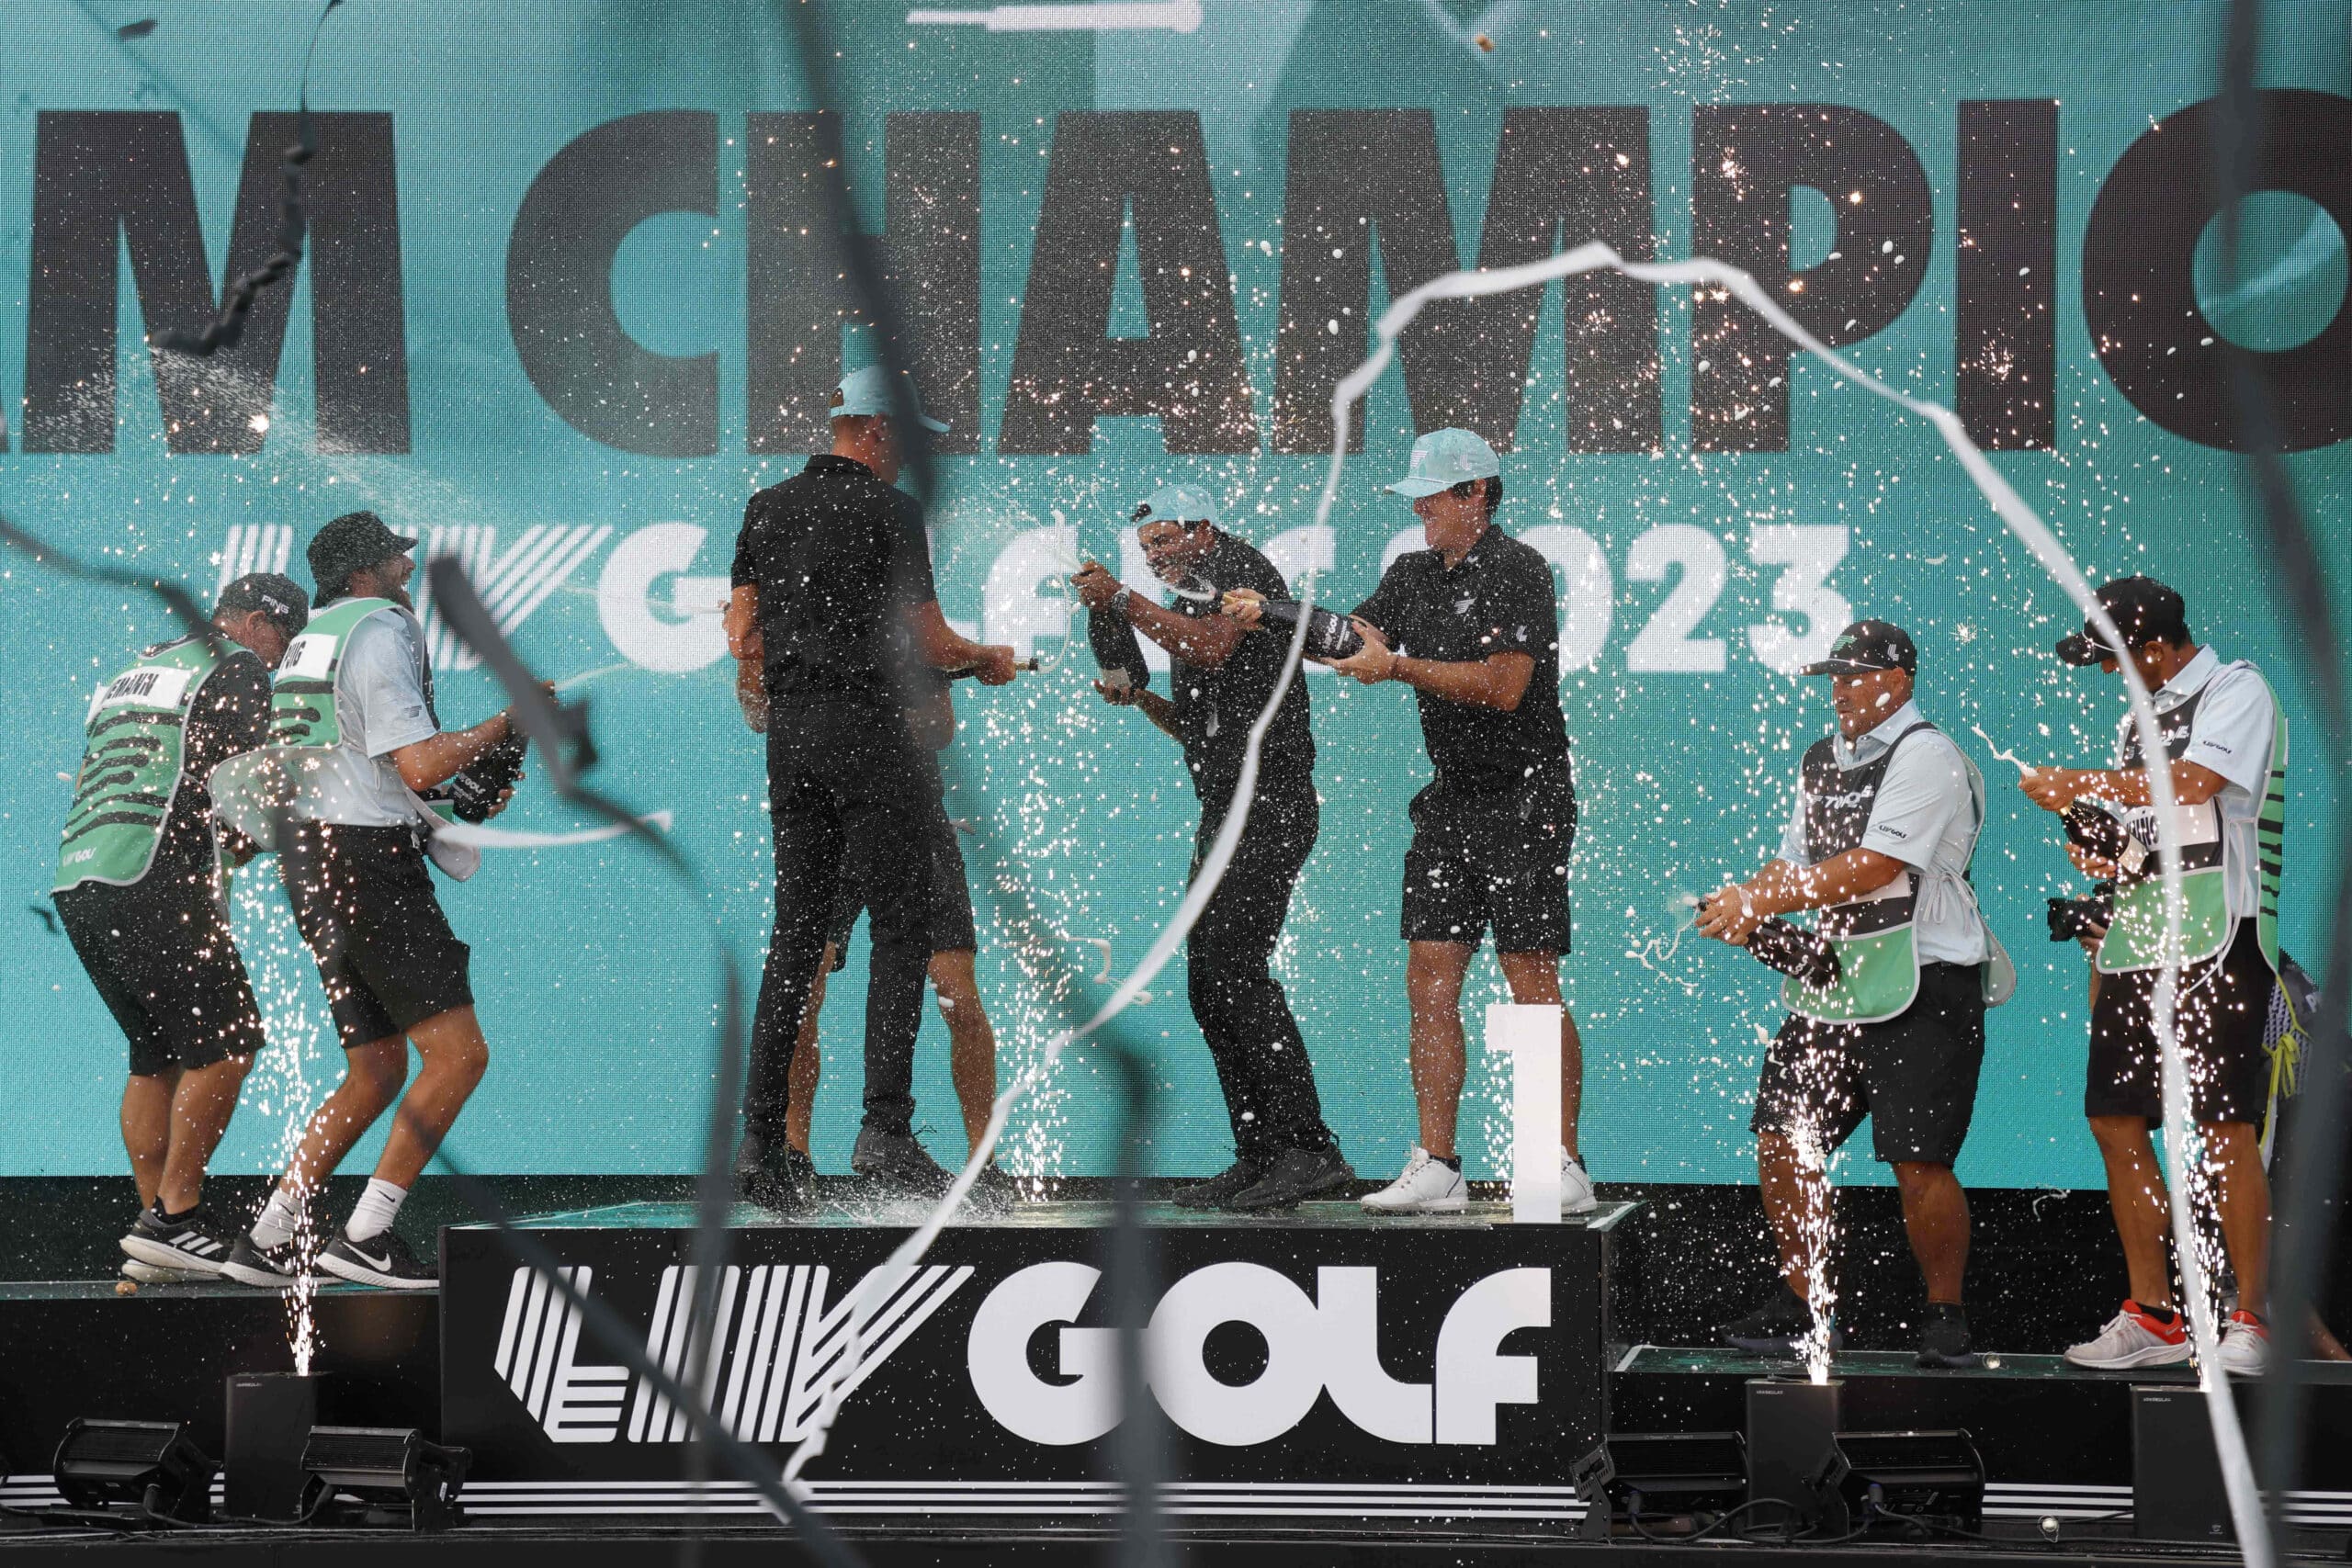 LIV and PGA Tour has decided to partner together to grow the game of golf.